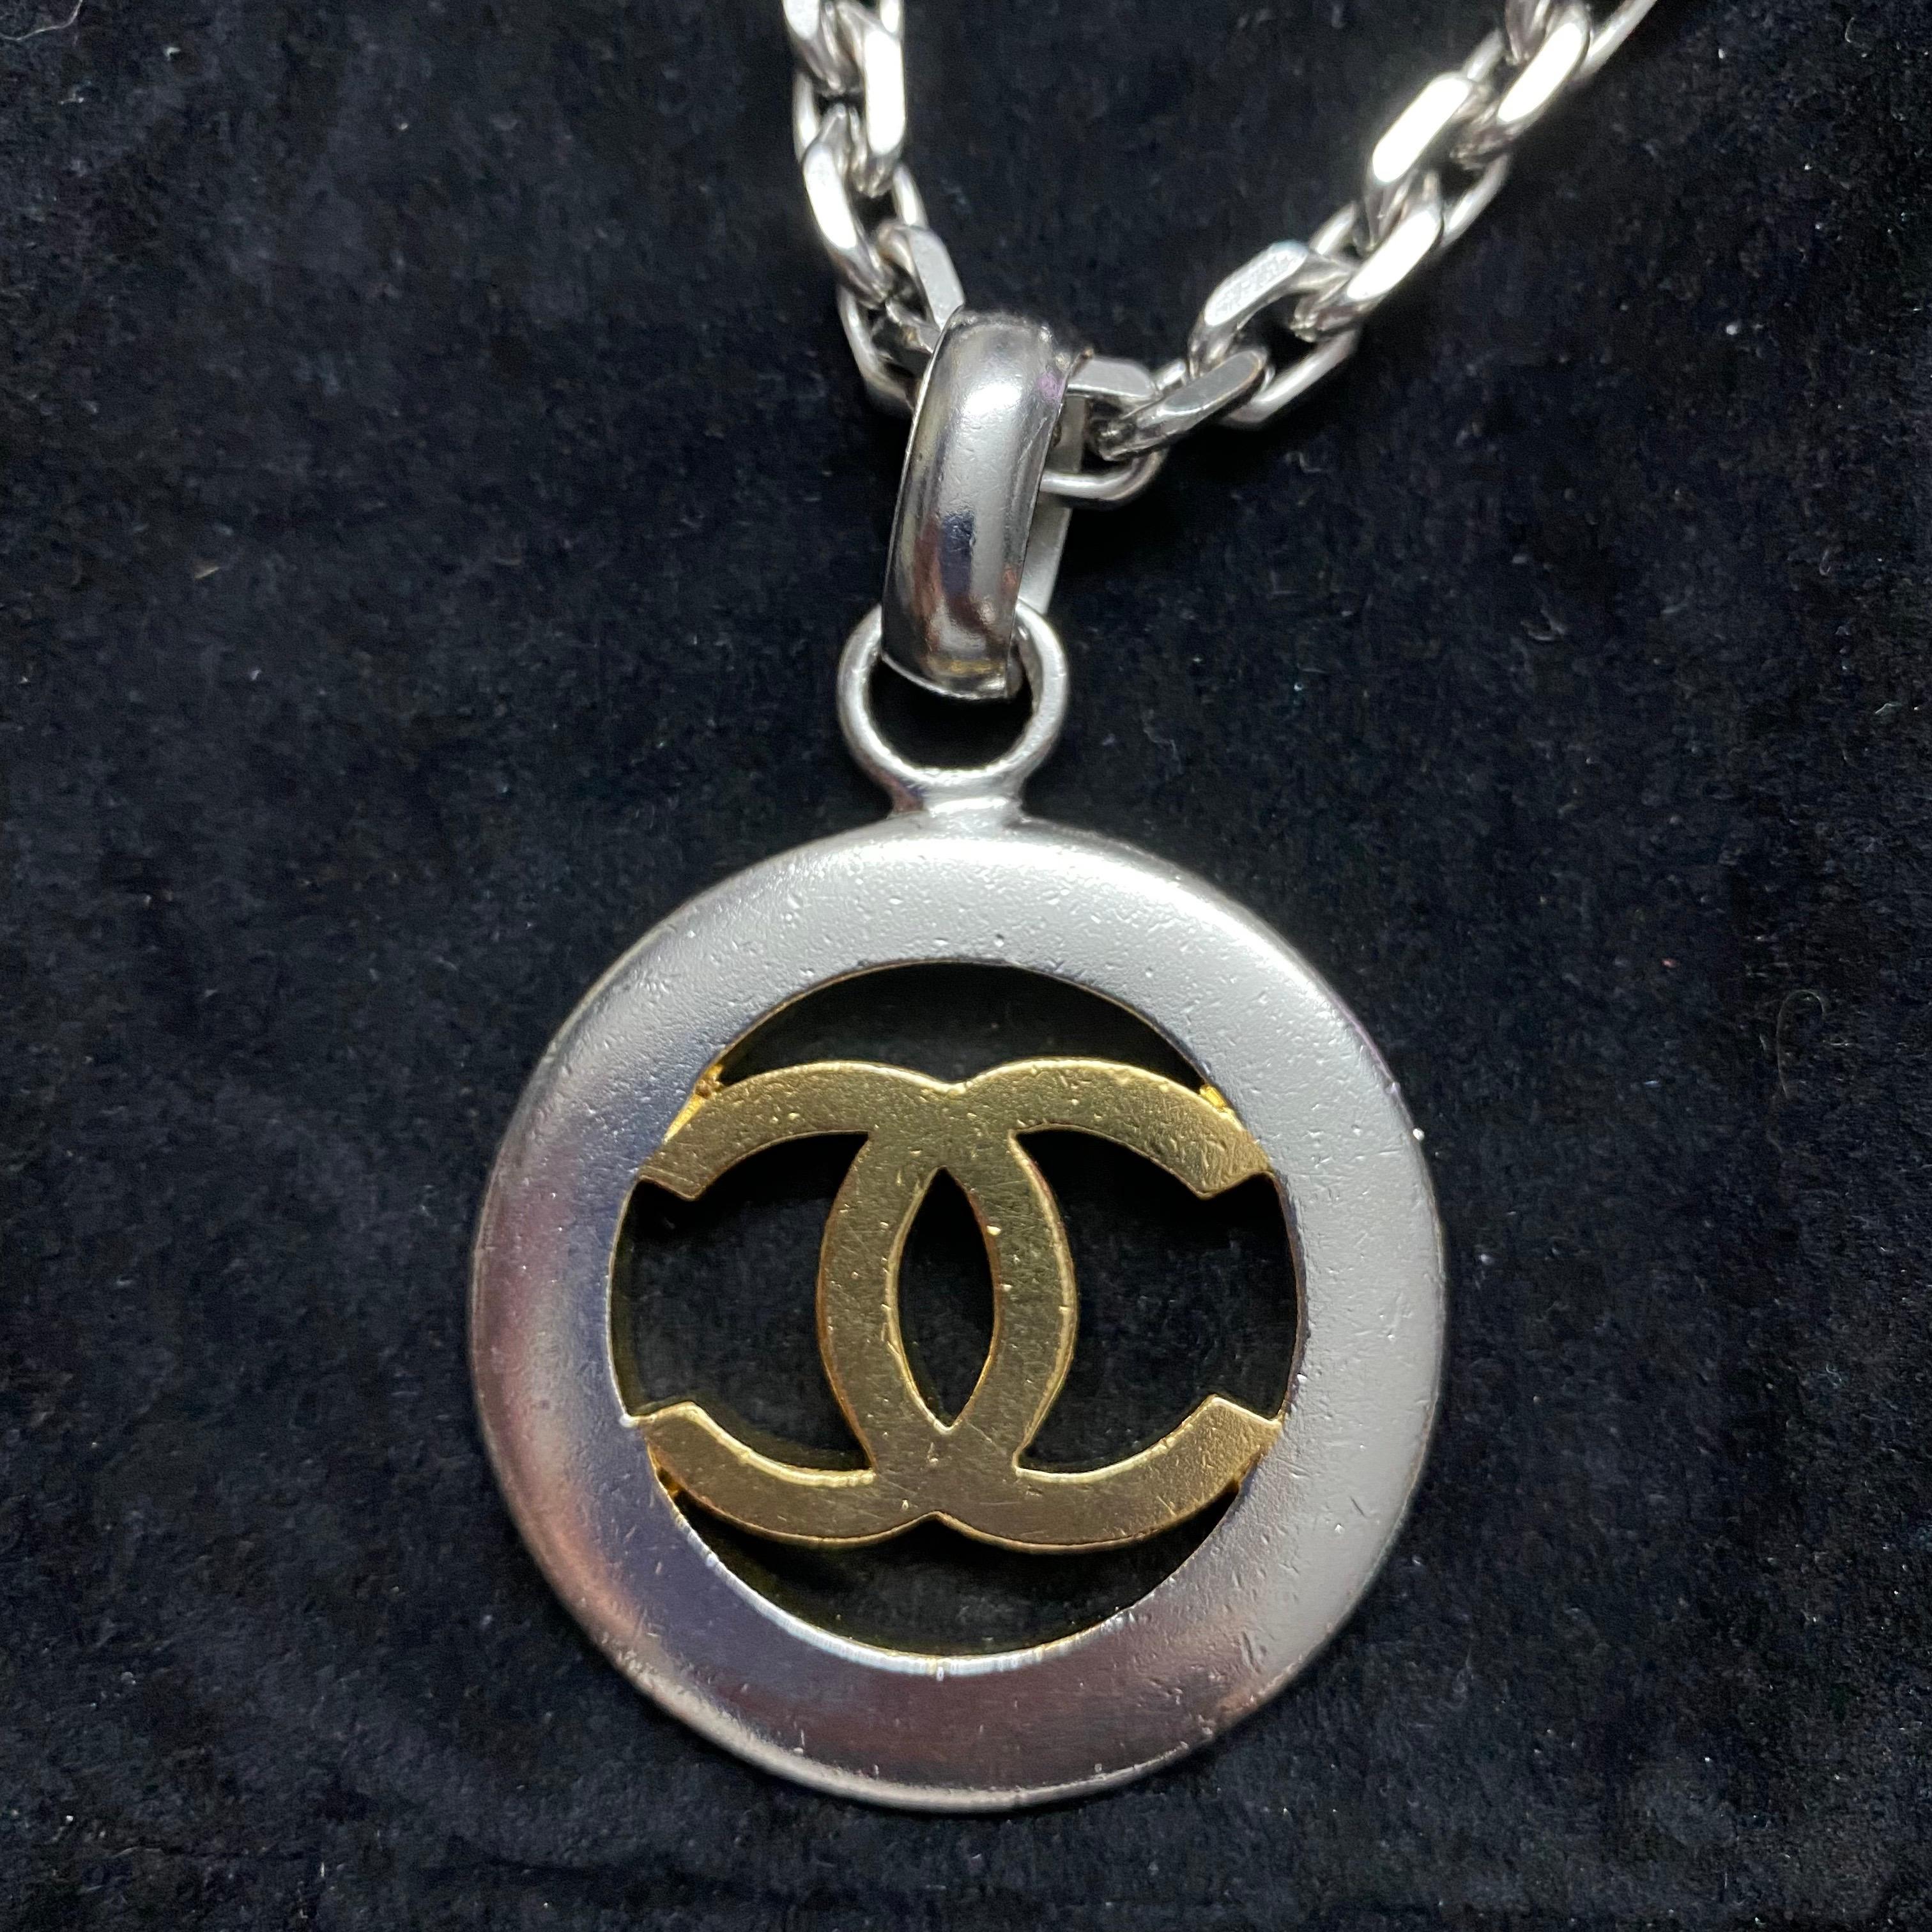 Chanel Vintage -  Necklace with CC pendant in Gold and Silver coated Metal 1